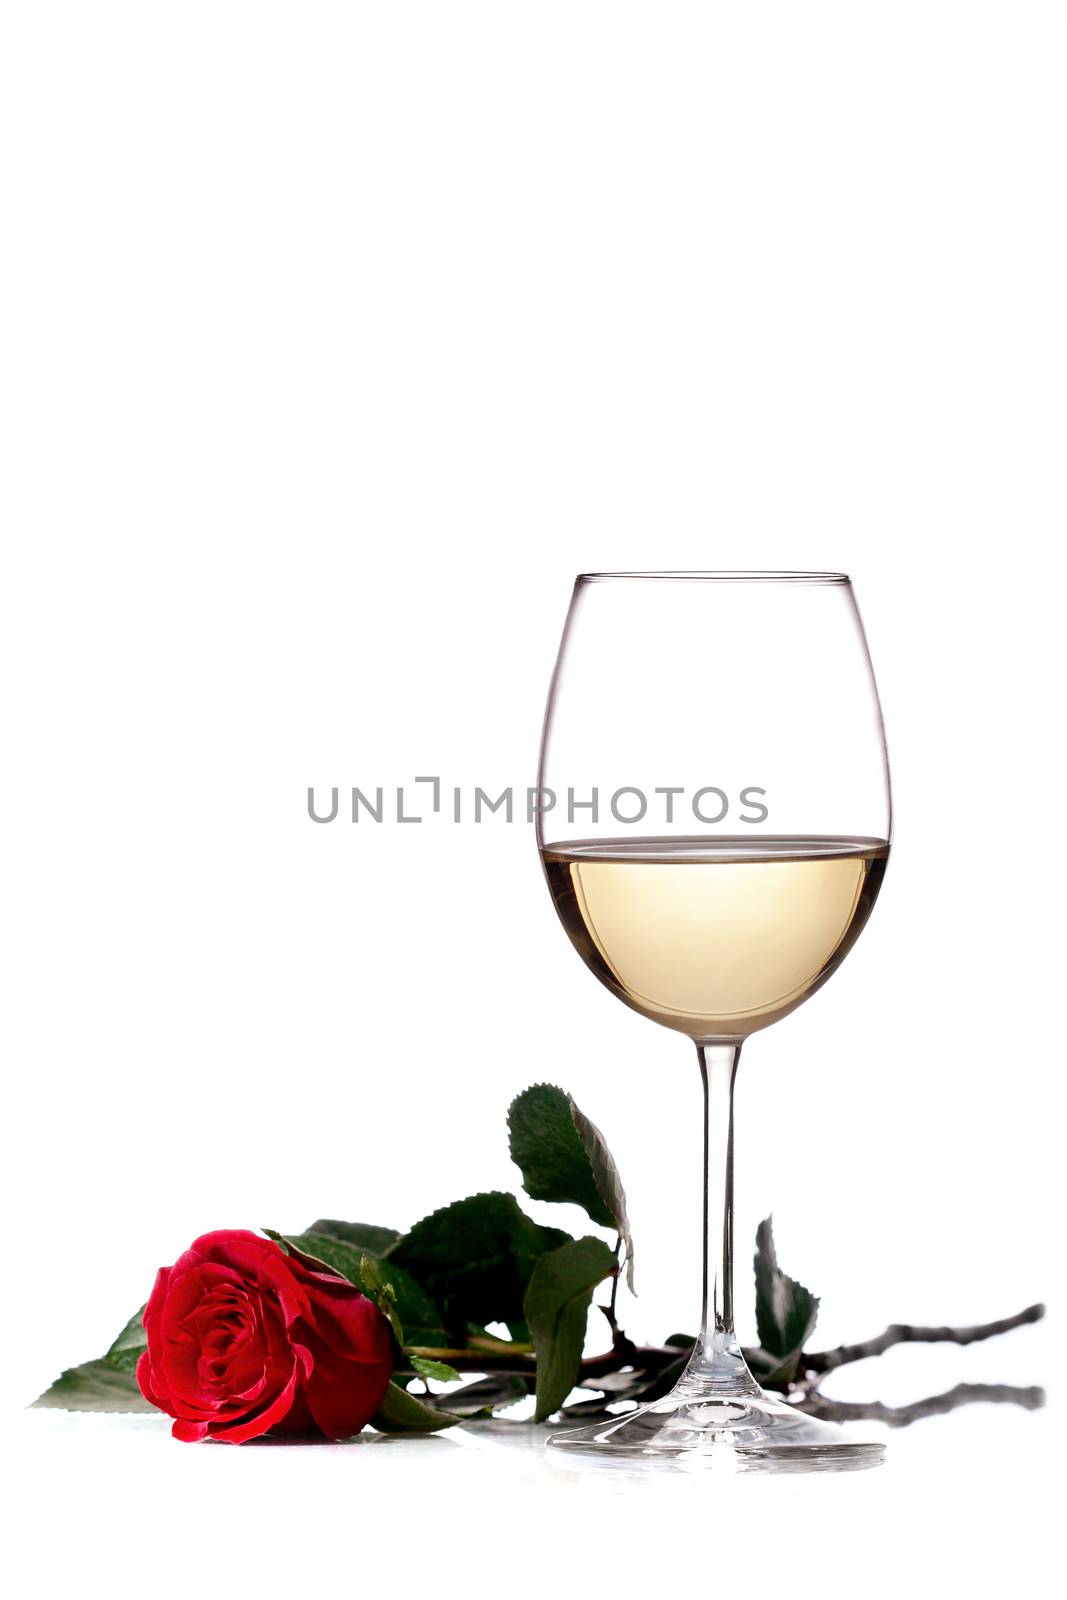 red rose next to a glass of white wine